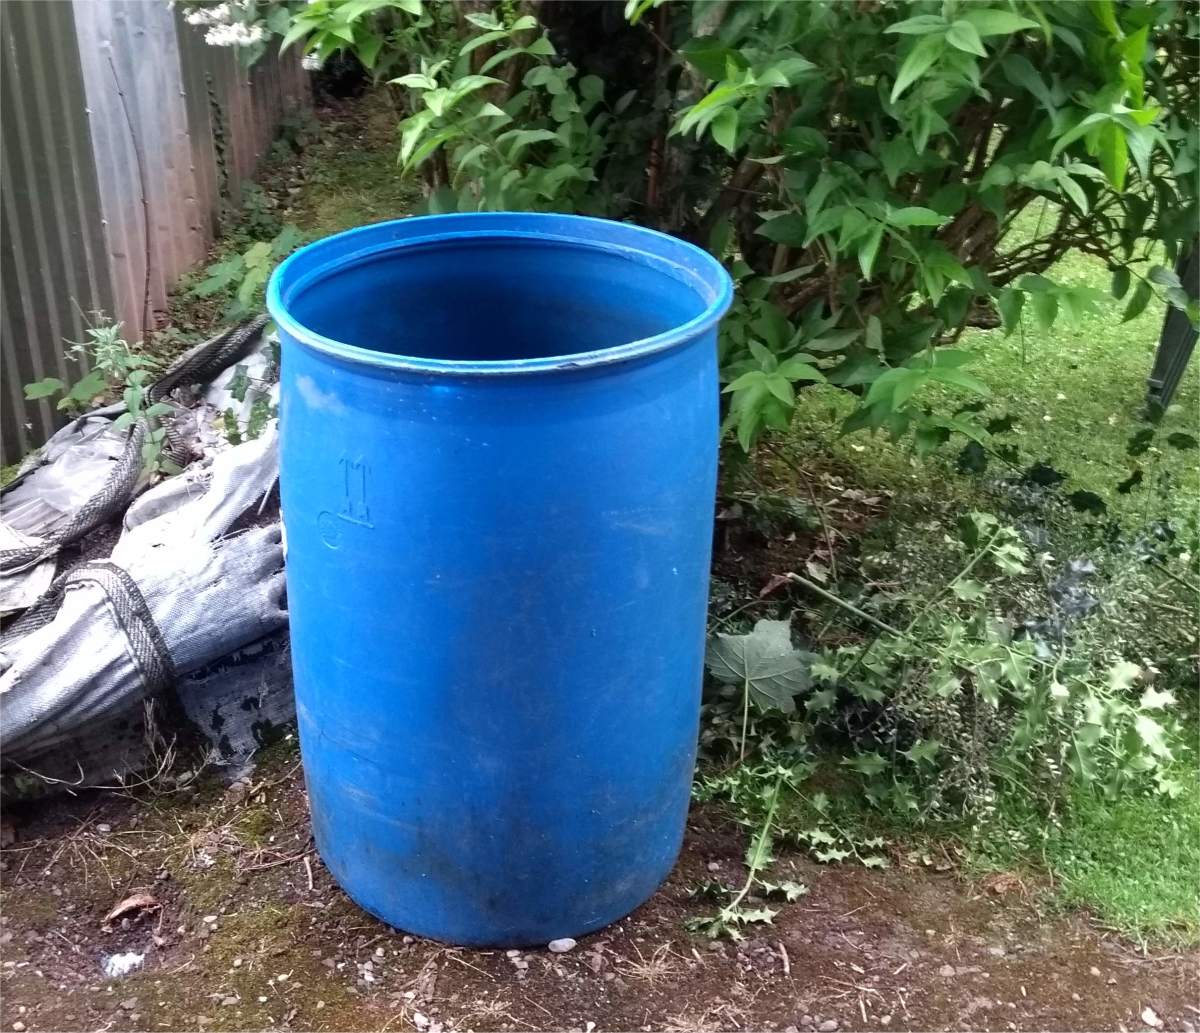 It's a good idea to have a small barrel like this one filled with water when mixing concrete.